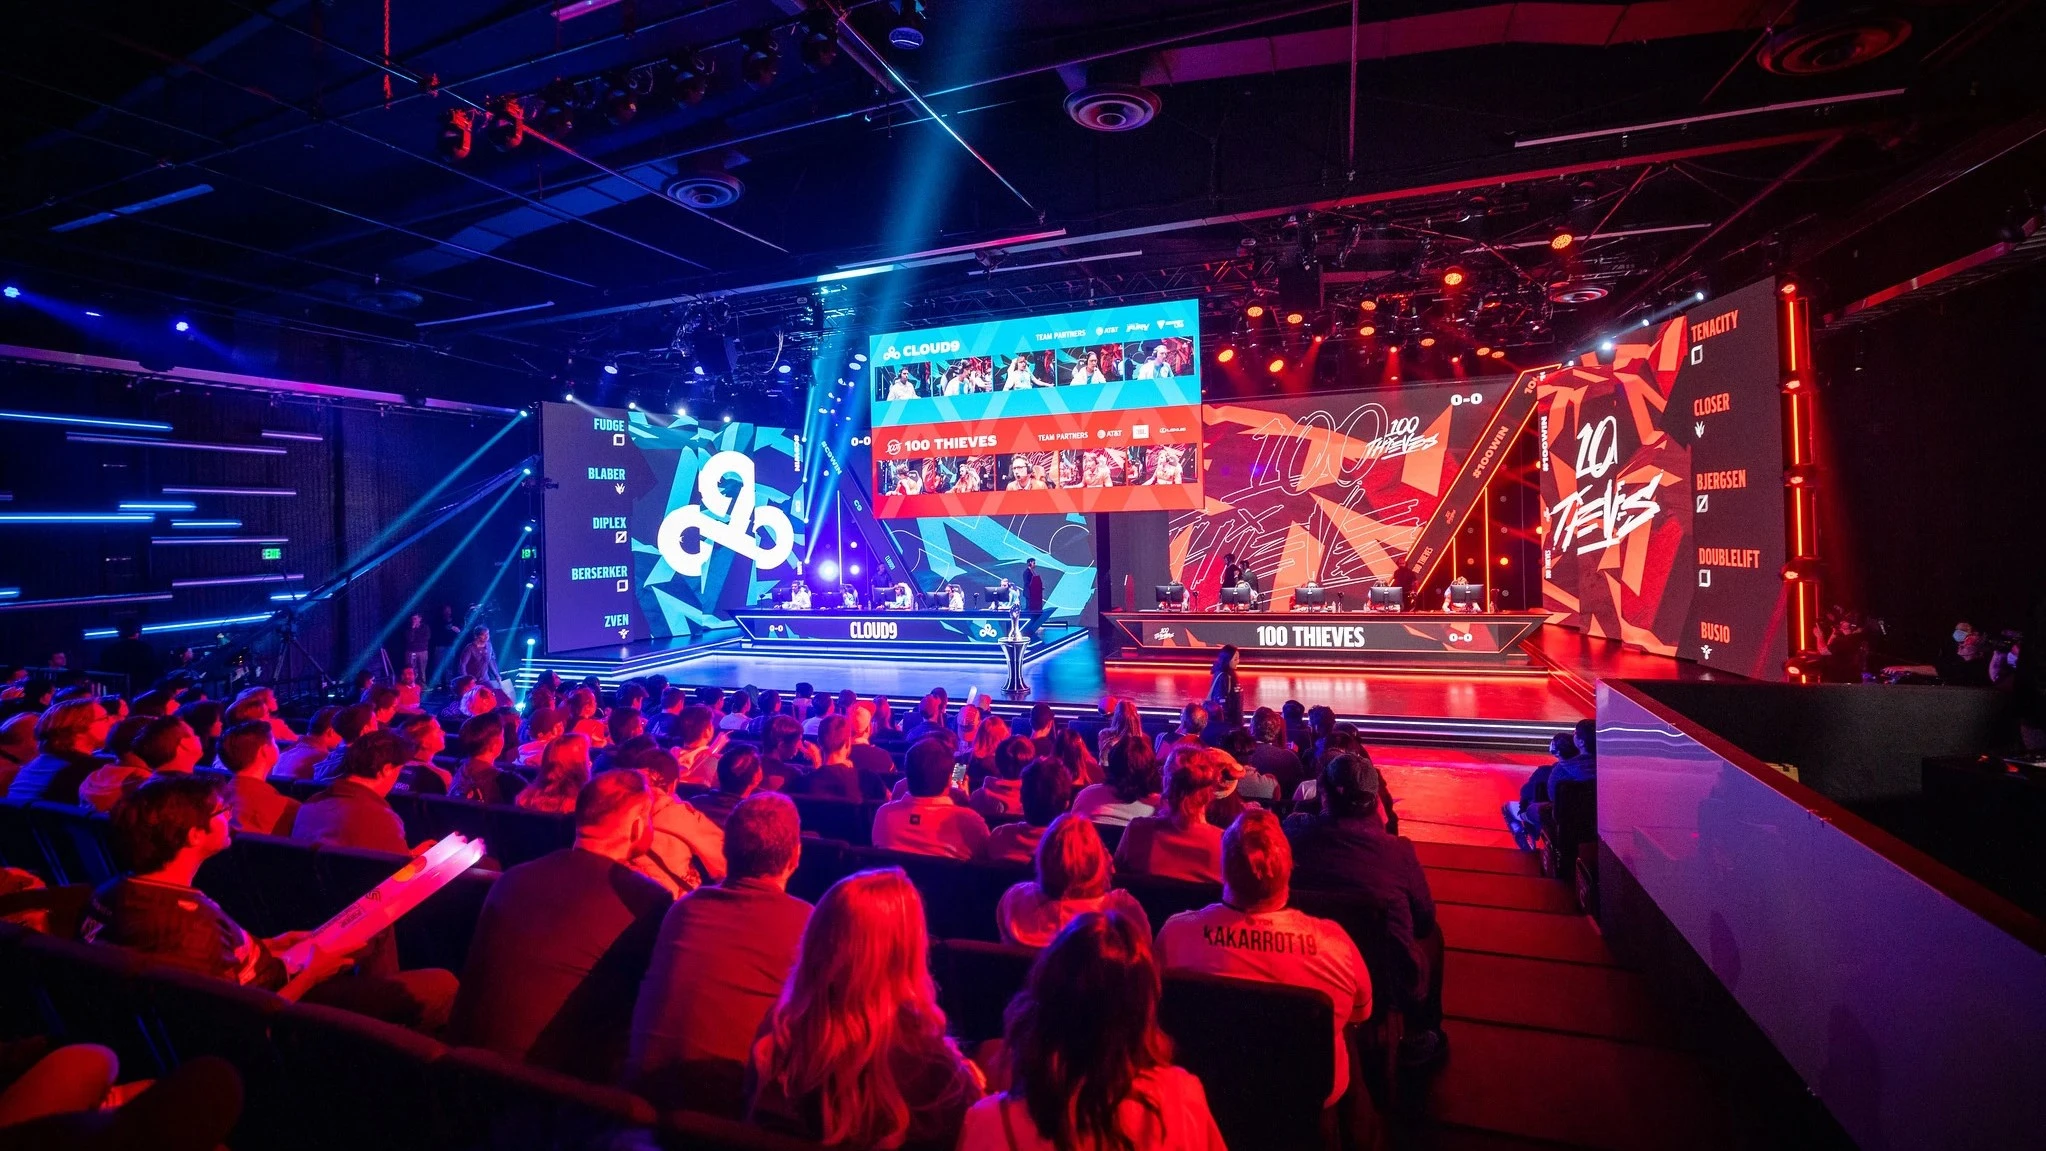 LCS games are played at Riot Games Arena in Los Angeles